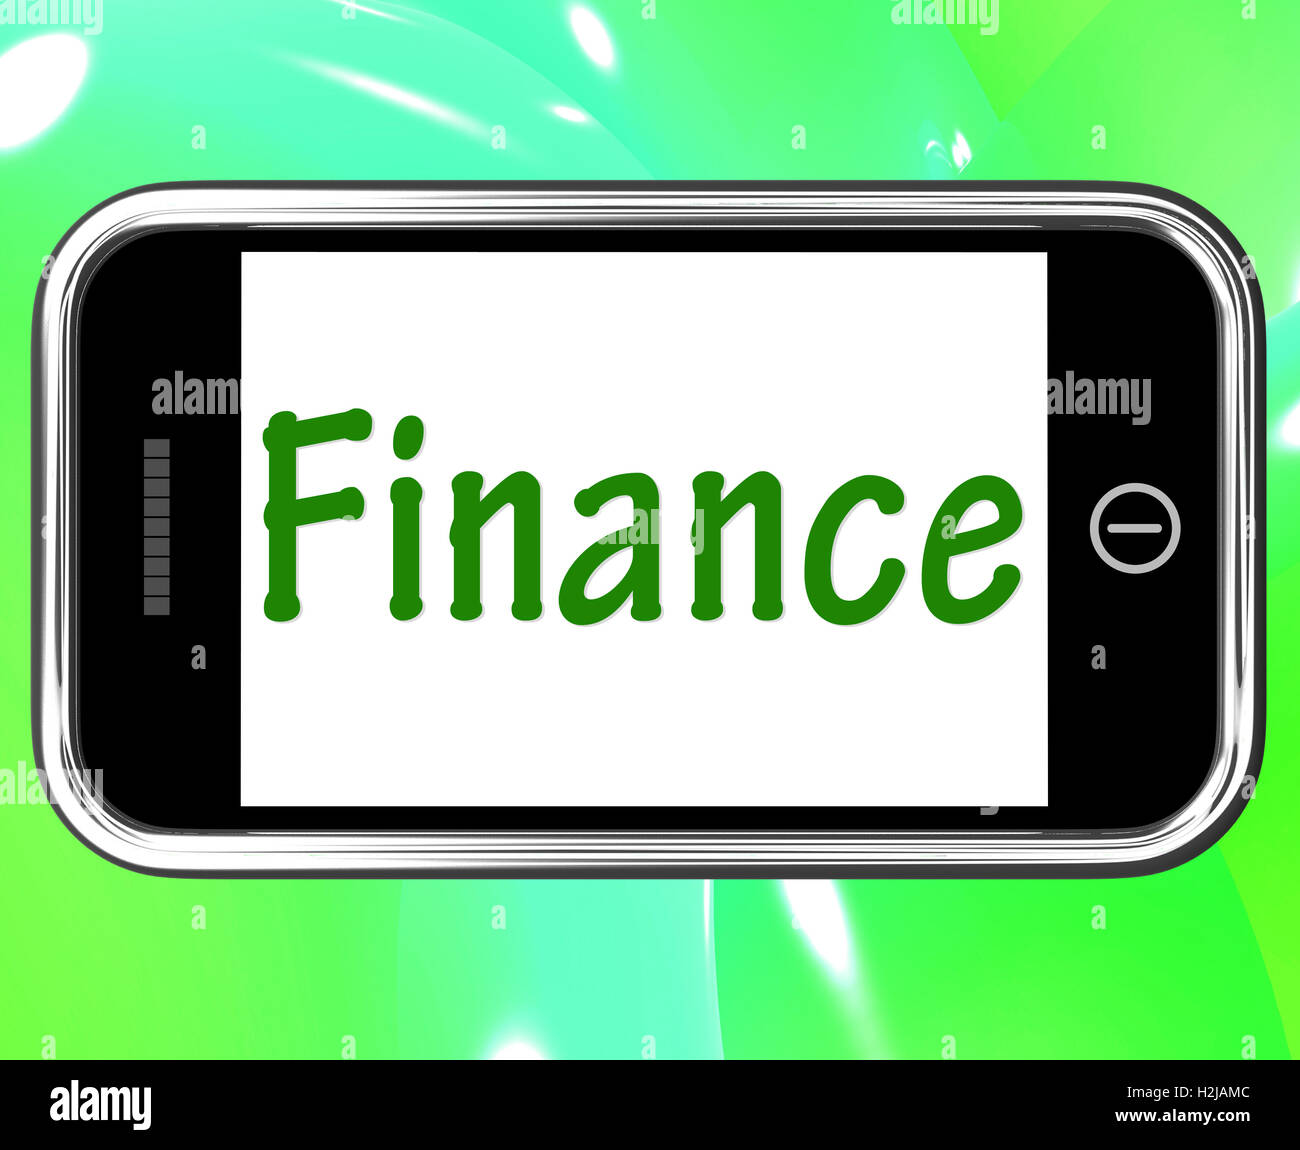 Finance Smartphone Shows Online Lending And Financing Stock Photo